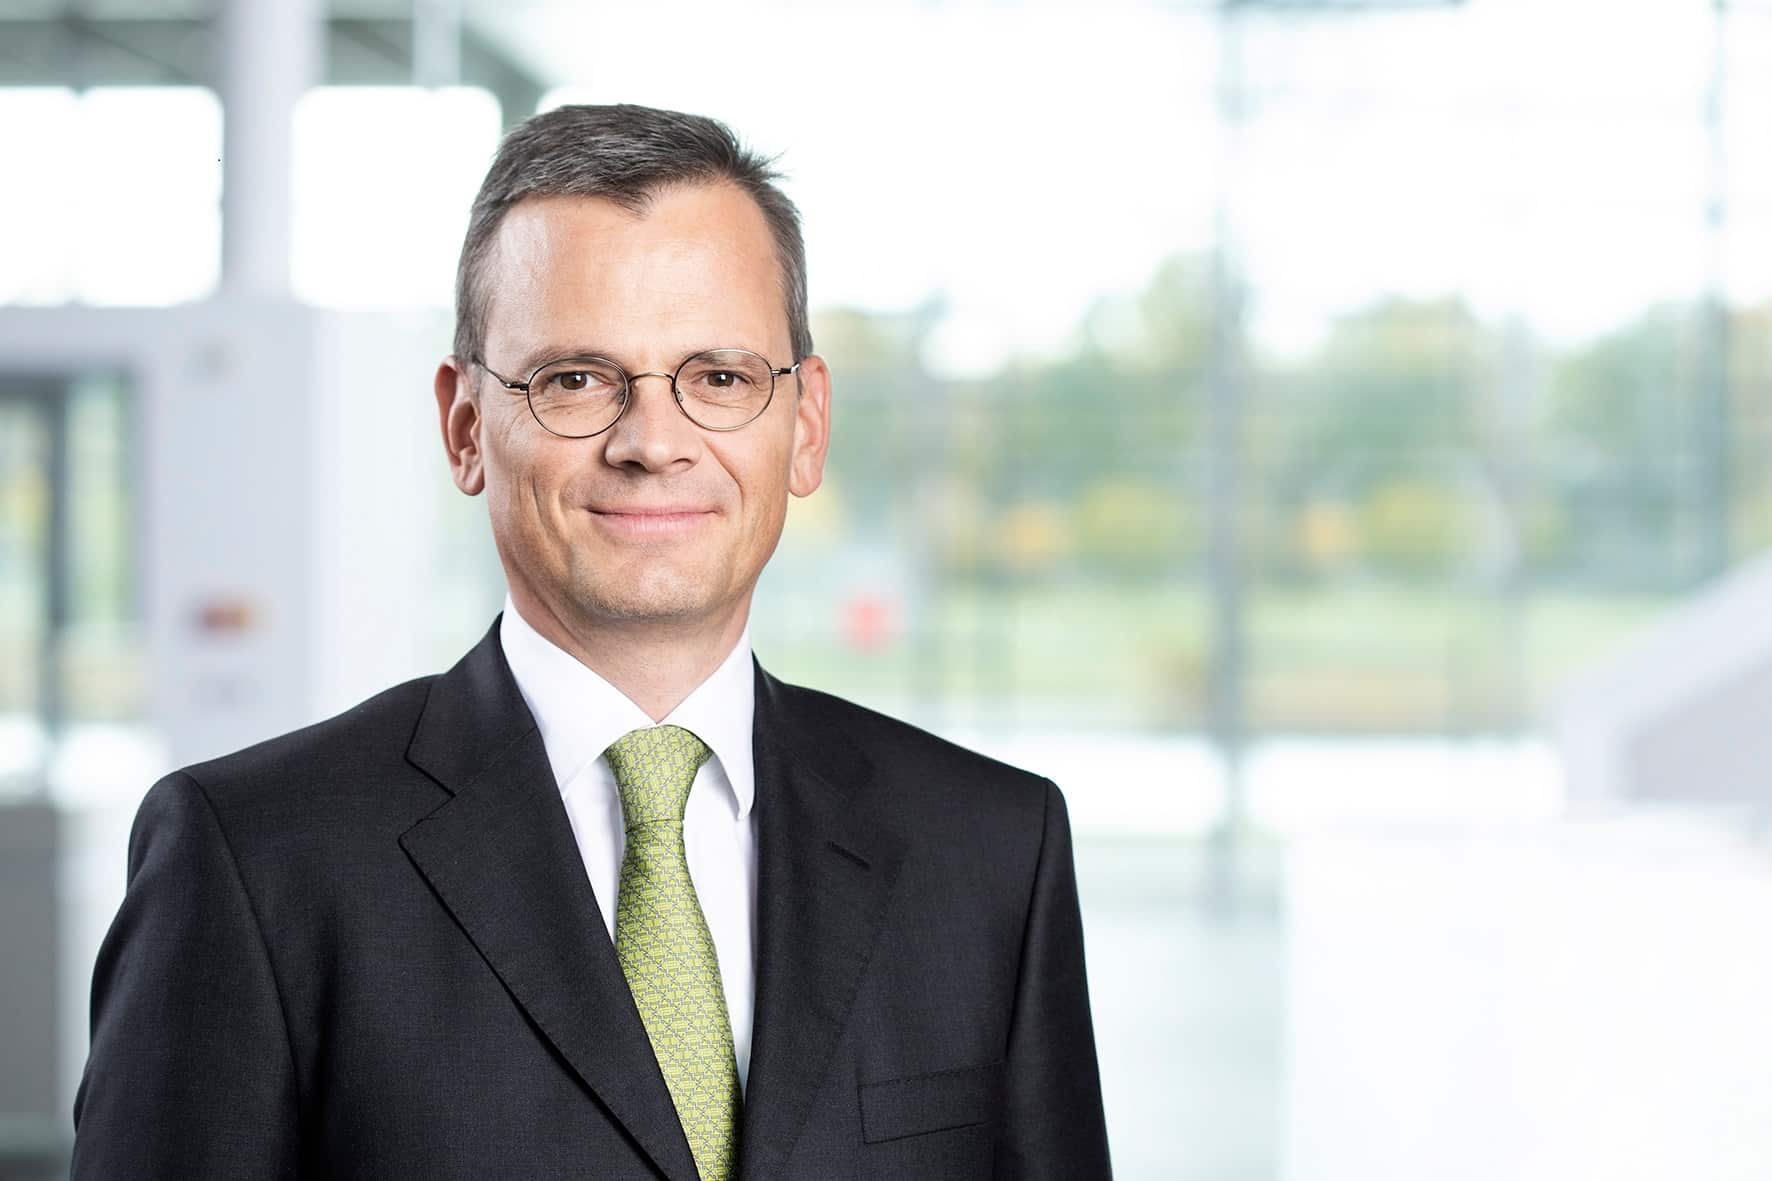 The SAP Supervisory Board has appointed Dominik Asam as CFO and member of the Executive Board of SAP SE.